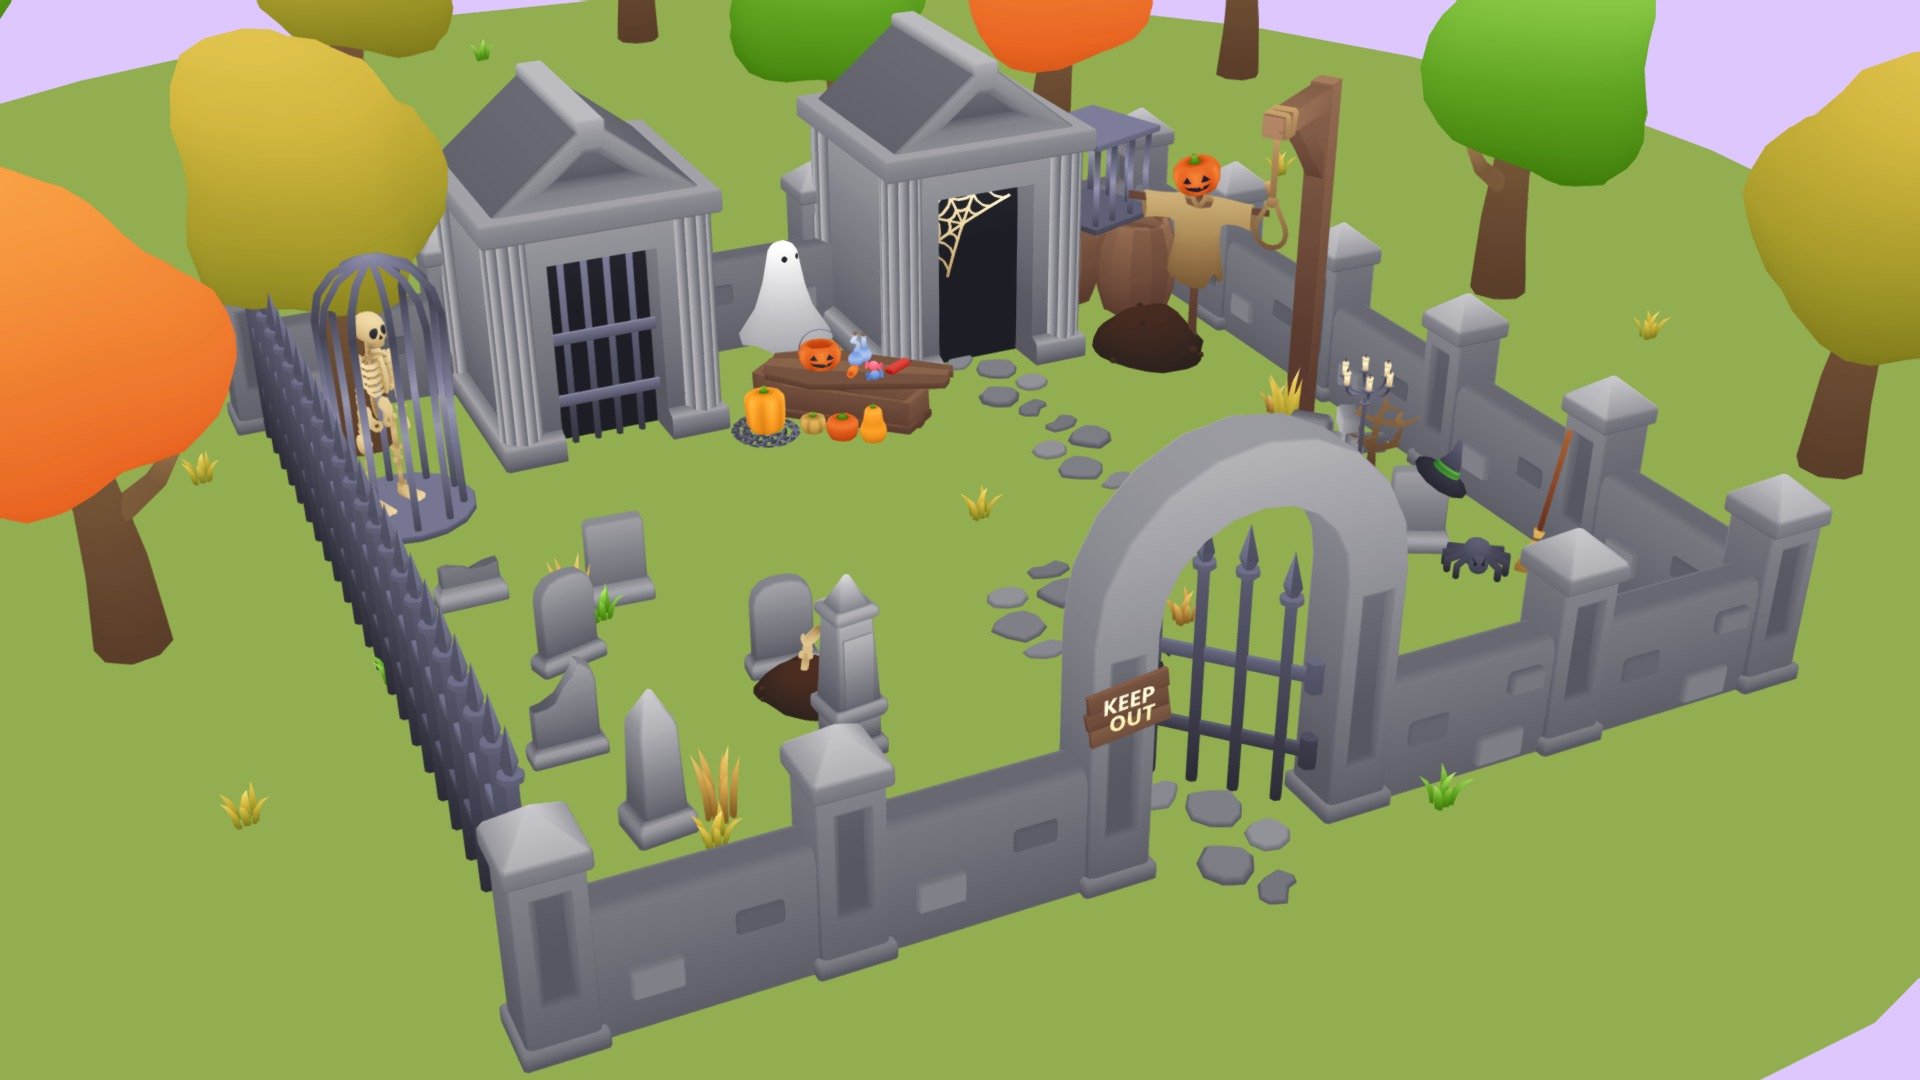 Fun and cute Lowpoly Spooky Pack! 
For Halloween, dungeons and cemetary themes.

&ndash;For sale on the Unity Assetstore&ndash;

Discover a wide range of Halloween-themed assets!

This package contains 207 Prefabs of the 120+ unique Assets included.
Comes with 193 sprites of those assets to use as images in inventories!

Coffin lids and some pumpkin lids can be lifted! Most unique assets come in several color variations. 
There are some things that could glow, like the pumpkins with yellow eyes, for this a texture for emissive materials is included. Using a toon shader is recommend for the best looks but I just use the built-in mobile unlit shader.

Types of stuff:
- Cemetery assets: headstones, modular walls and fences, etc
- Vegetation: trees, shrub, grass, tall grass, pumpkins (6 types with color variations)
- Halloween assets: scarecrow, candy, hats and props, etc
- Dungeon/manor props: crates, barrely, guillotine, cages, coffins, candles, etc - Jacky's Lowpoly Spooky Pack - 3D model by Jacky Vintonjek (@JVintonjek) 3d model